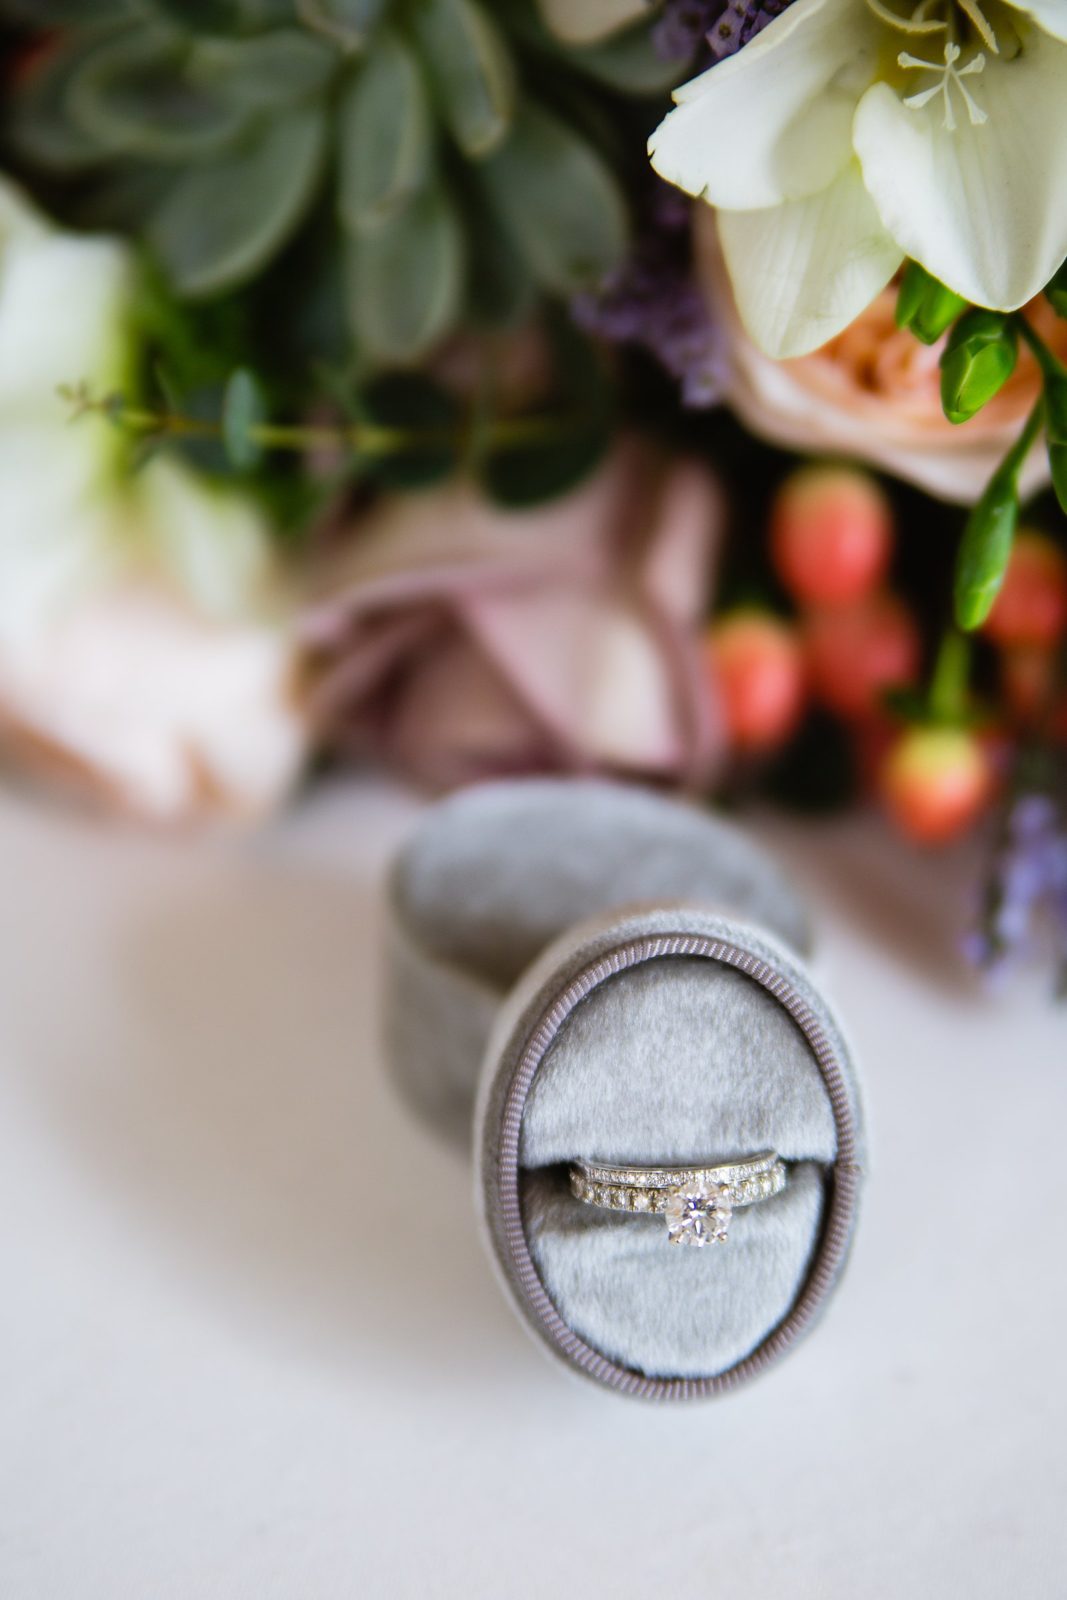 Classic white gold engagement ring and wedding band by PMA Photography.